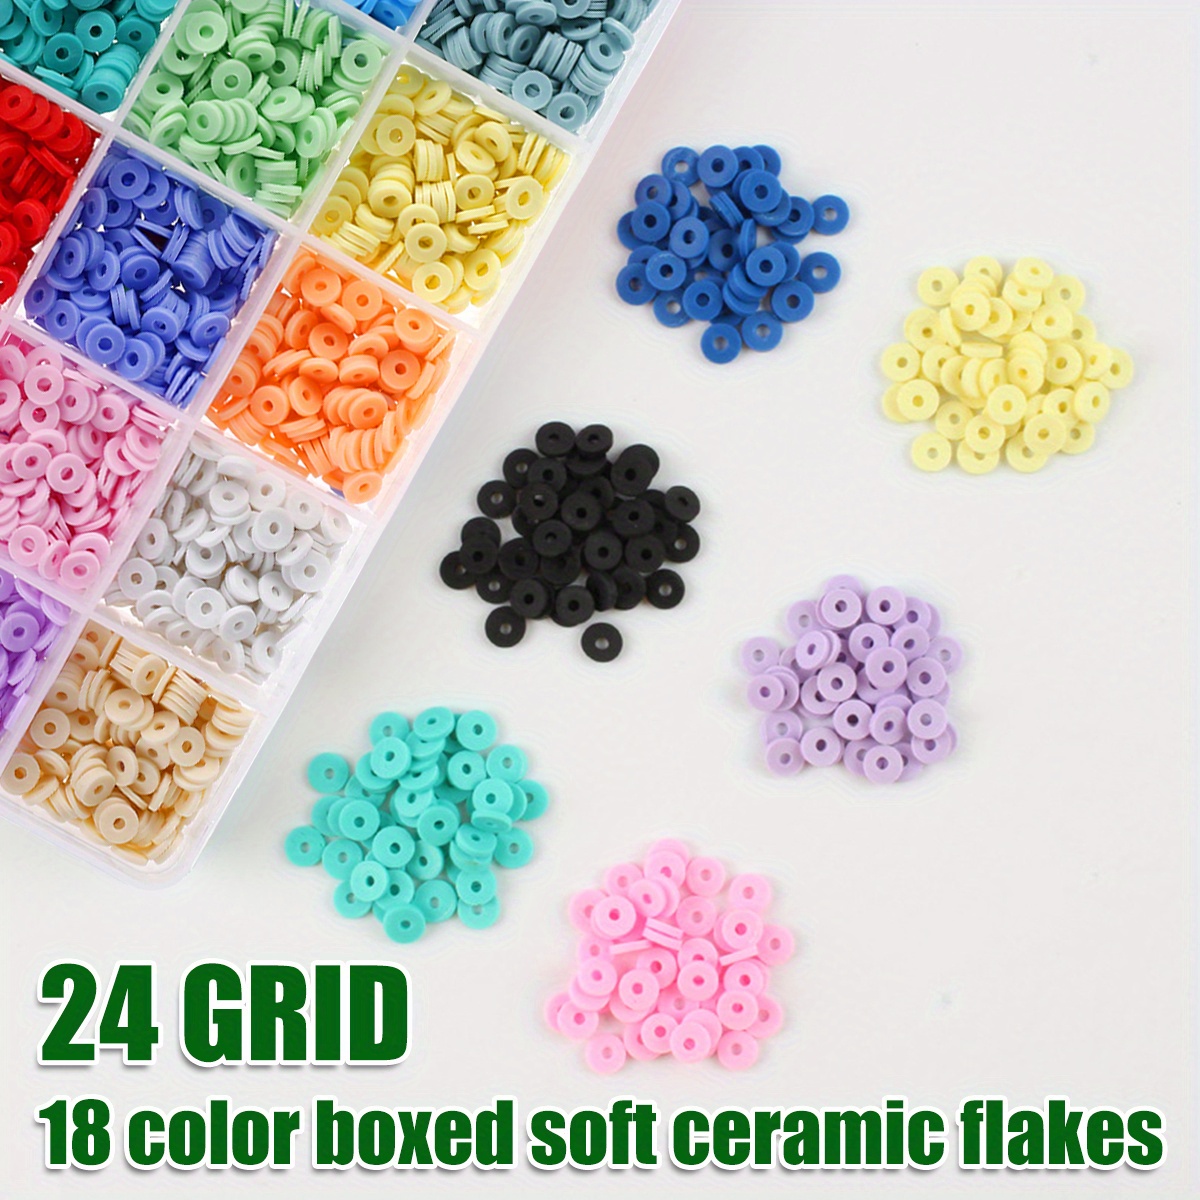 Tilhumt Wooden Clay Bead Spinner Kit, Electric Bead Spinner for Jewelry  Making with 3600 PCS 18 Colors Clay Beads and Beading Accessories for  Making